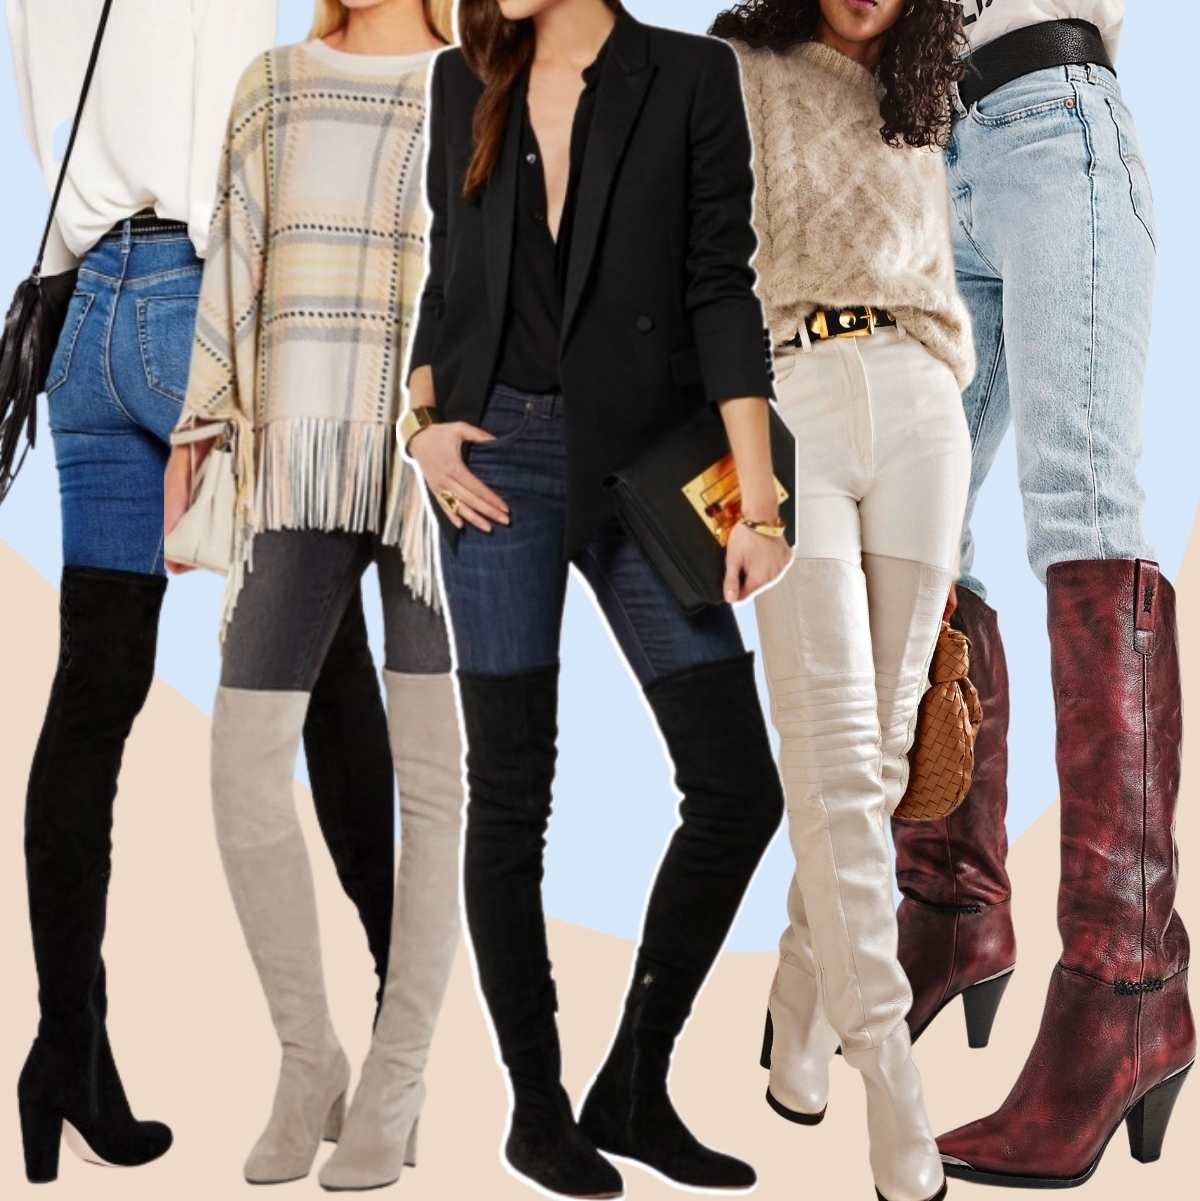 Collage of 5 women wearing different thigh high outfits with jeans.